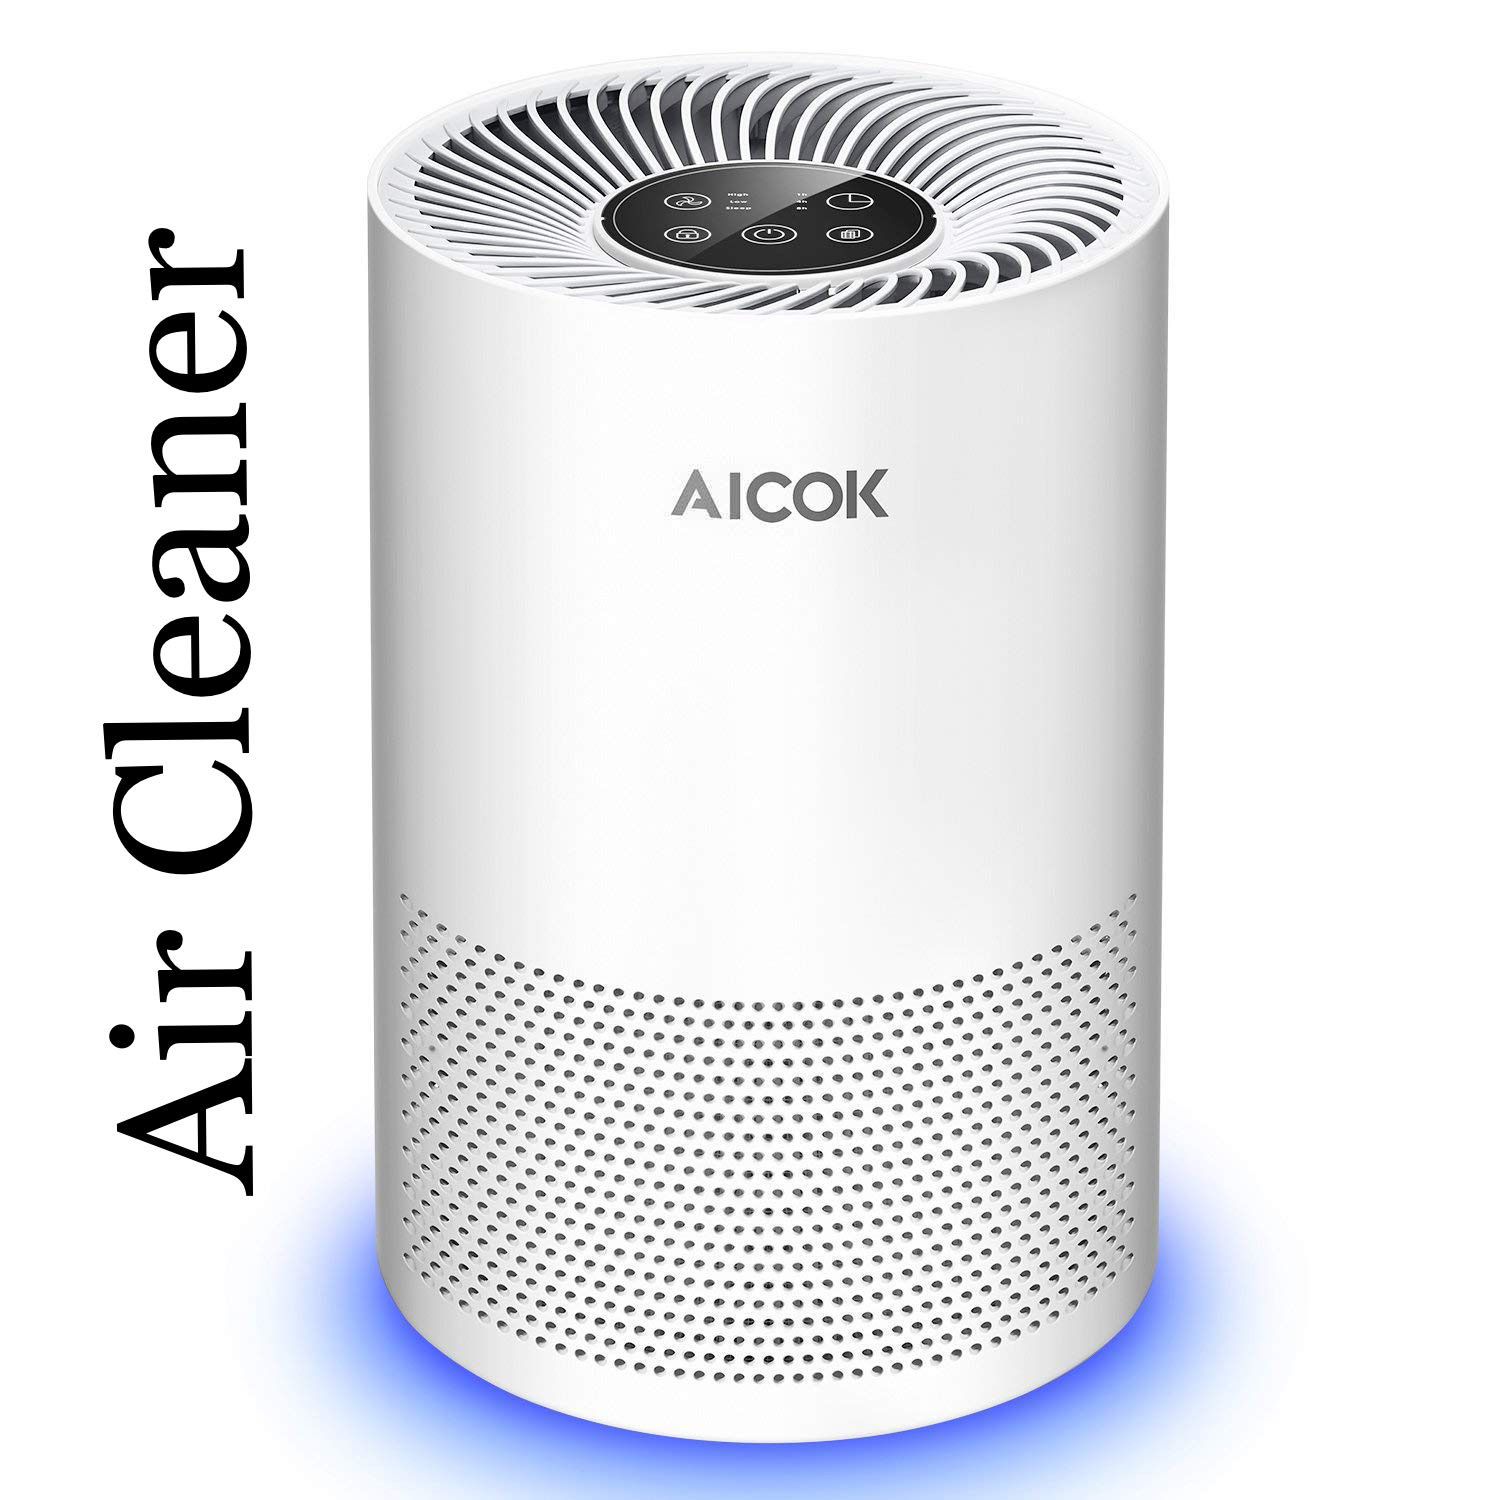 Aicok Air Purifier with True HEPA Filter and Optional Night Light, Air Cleaner Air Filter